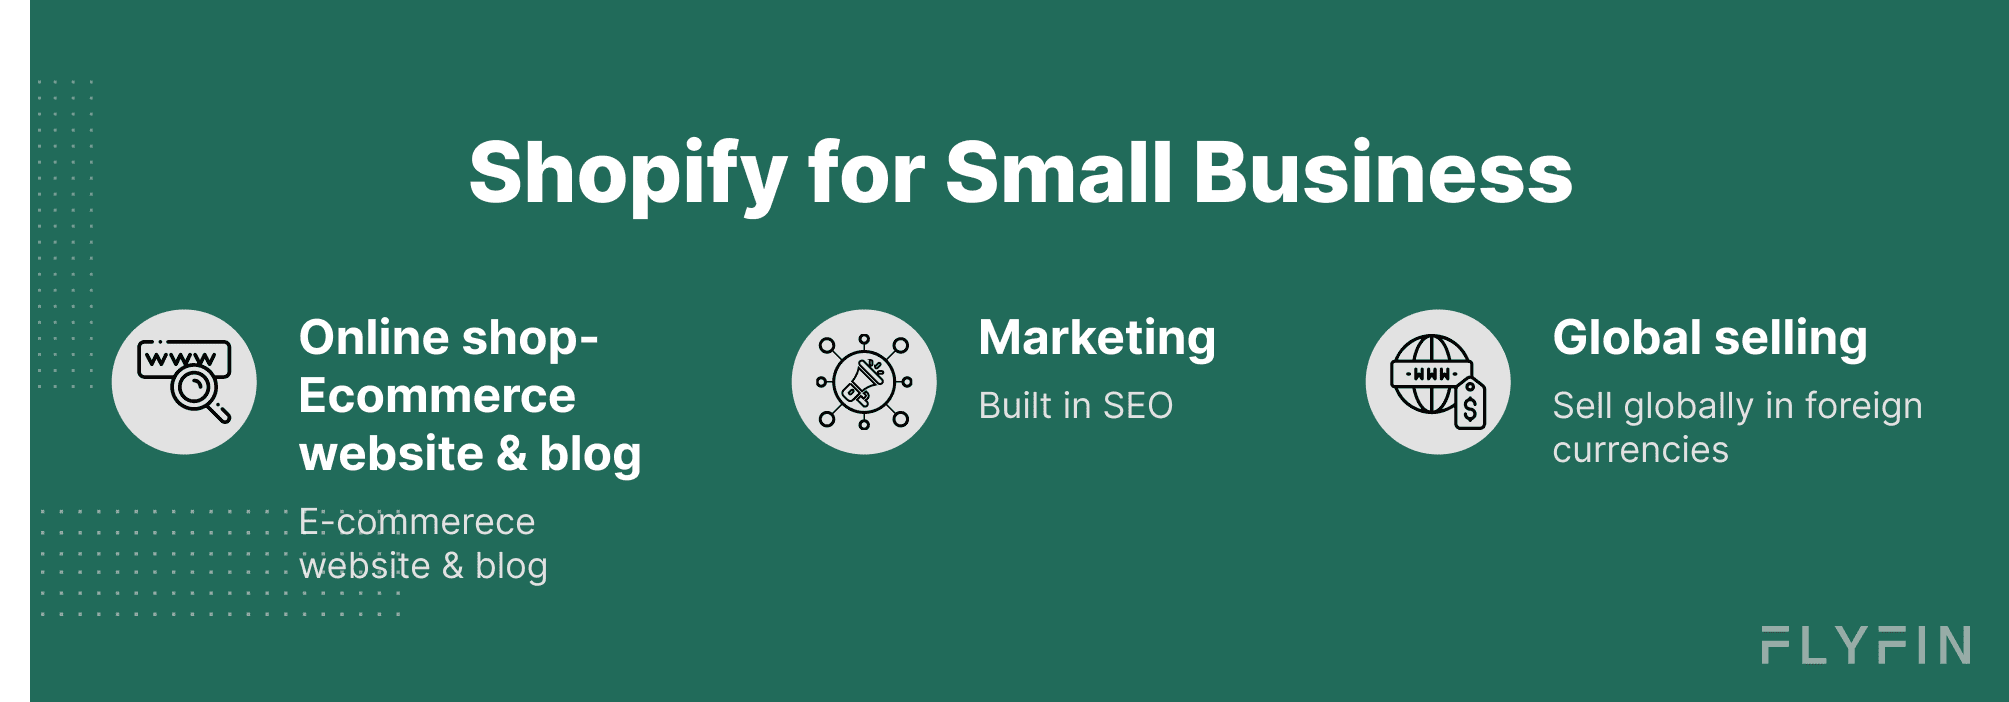 Shopify for Small Business: Ecommerce, Blog & Global SellingImage promoting Shopify for small businesses with features like online shop, ecommerce website & blog, built-in SEO, global selling in foreign currencies. Ideal for entrepreneurs and small business owners.